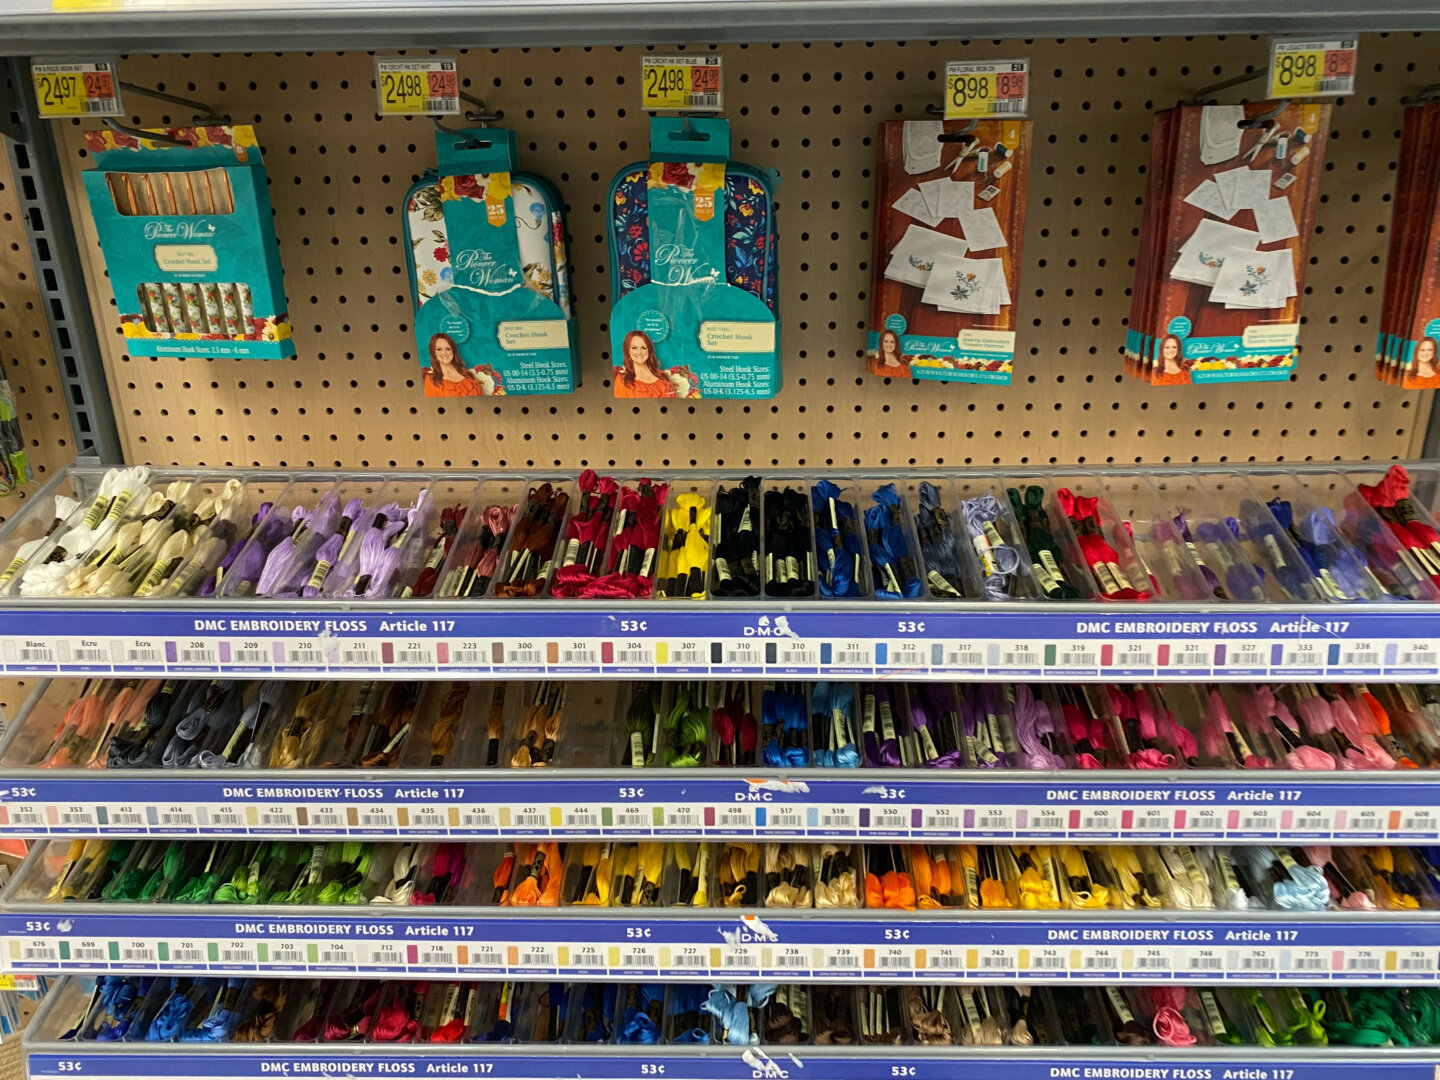 Colorful Creations with Walmart's Embroidery Floss